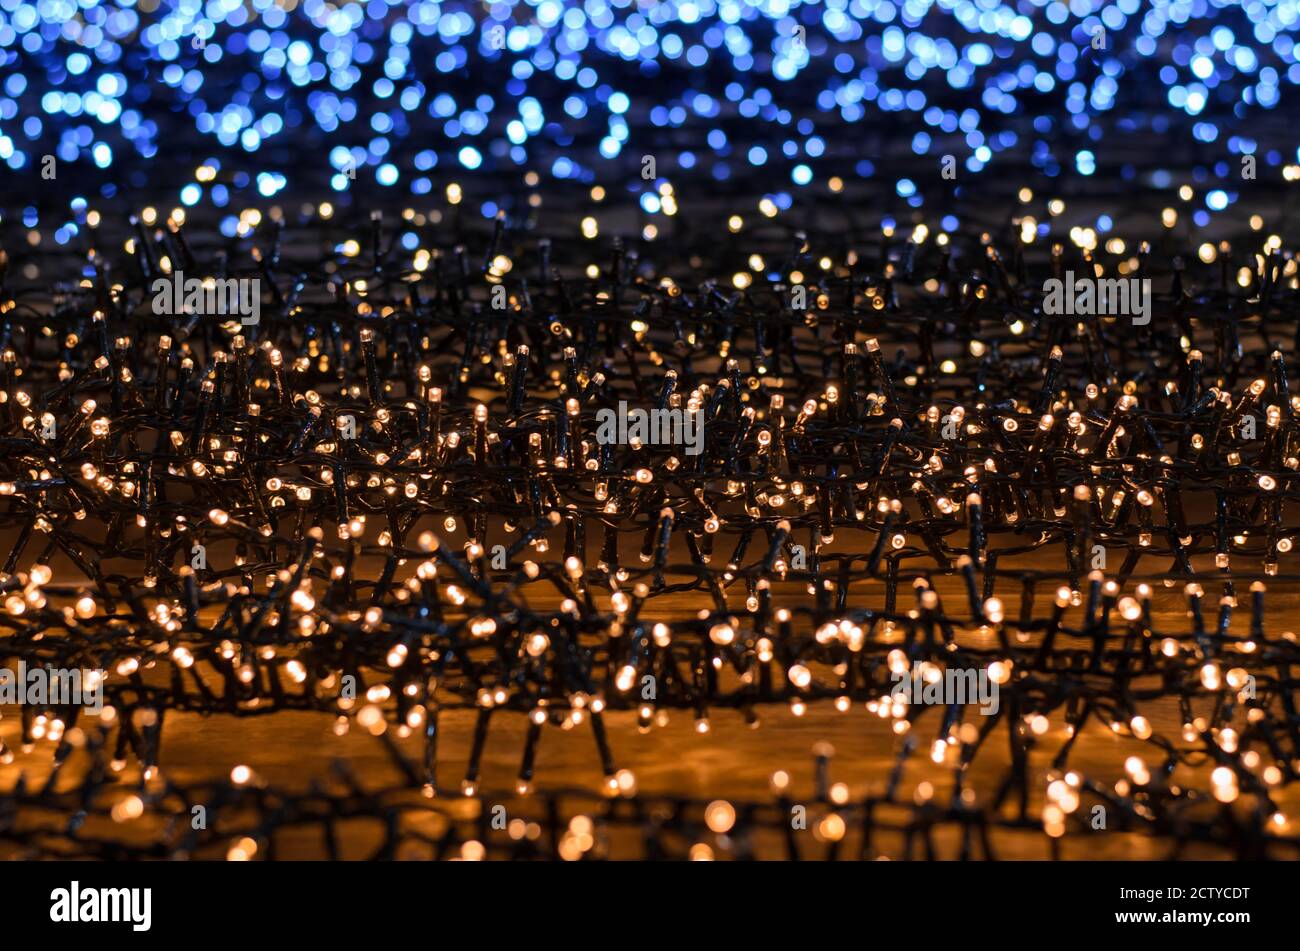 Blue and yellow lights Christmas garlands. Abstract background. Selective focus. Stock Photo